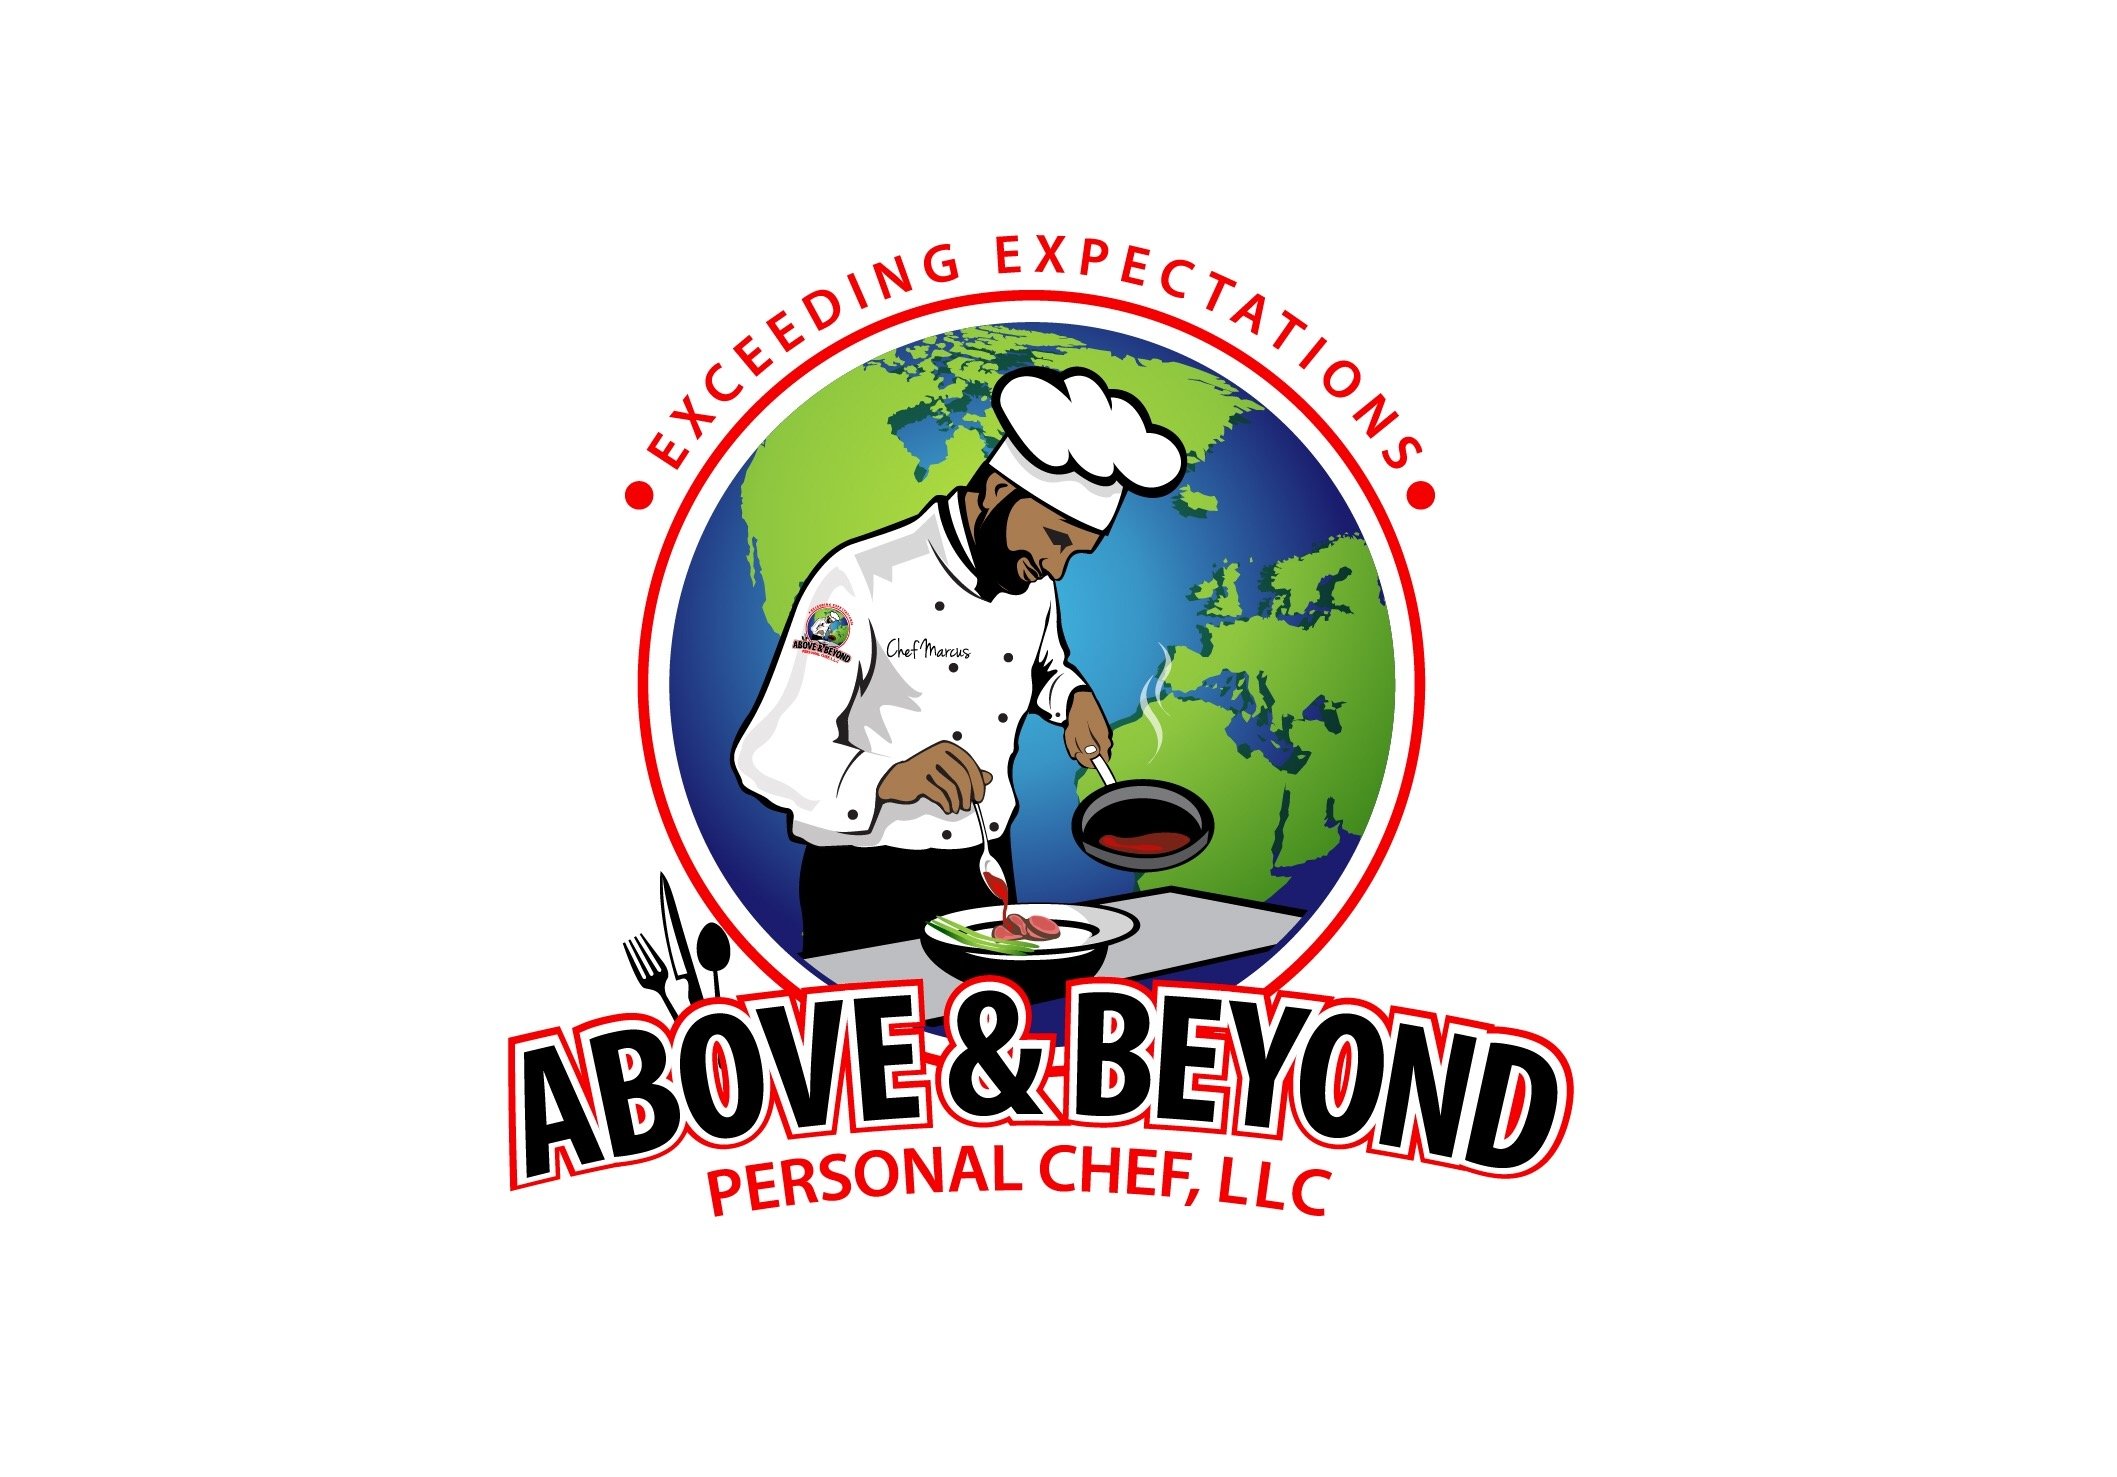 Personal Chef | Meal Prep | Culinary Artist Above & Beyond Personal Chef, LLC 👨🏾‍🍳🇩🇲 IG: @Chef_aboveandbeyond